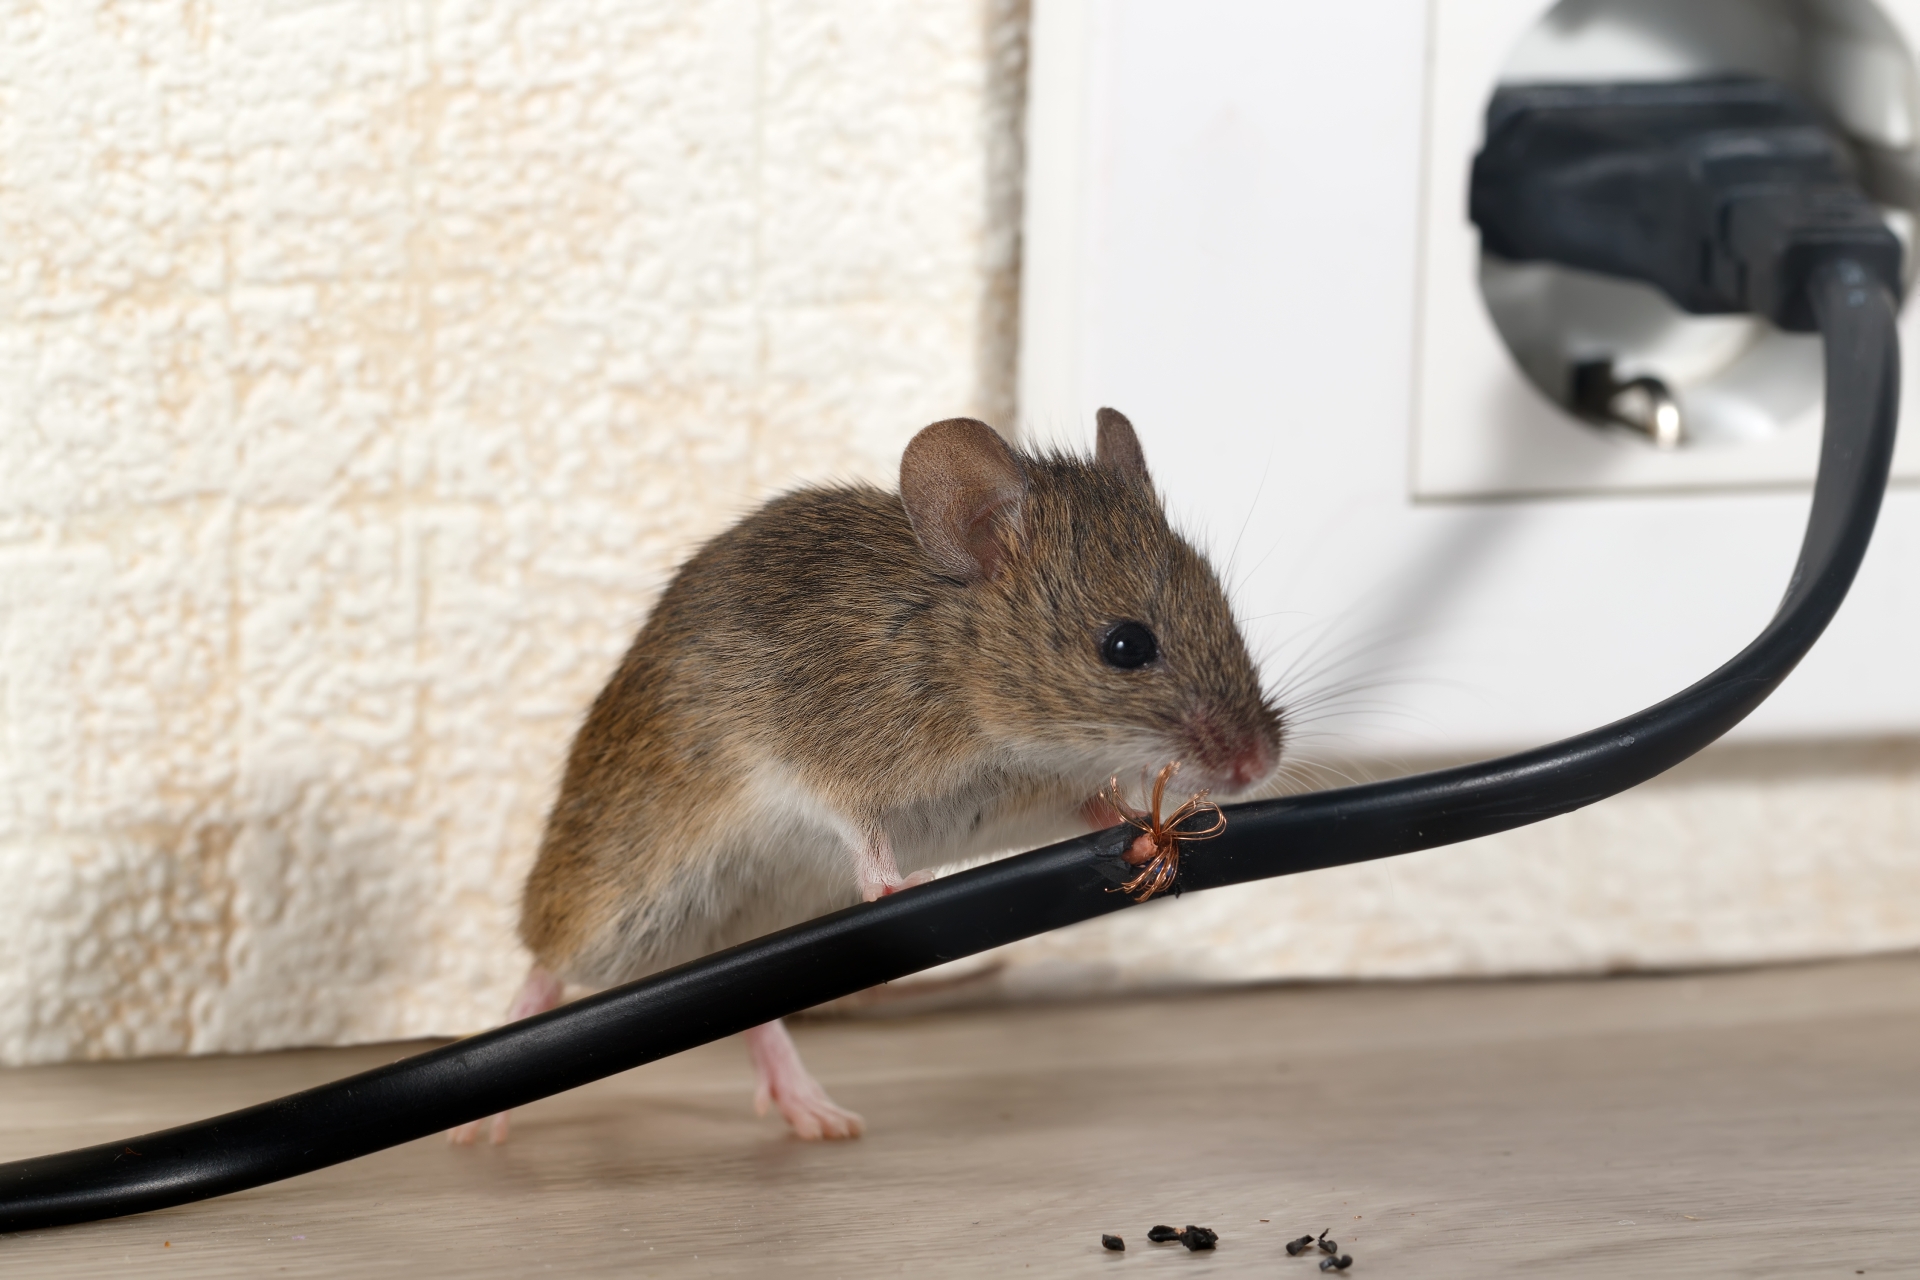 Mice Infestation, Pest Control in Northolt, UB5. Call Now 020 8166 9746